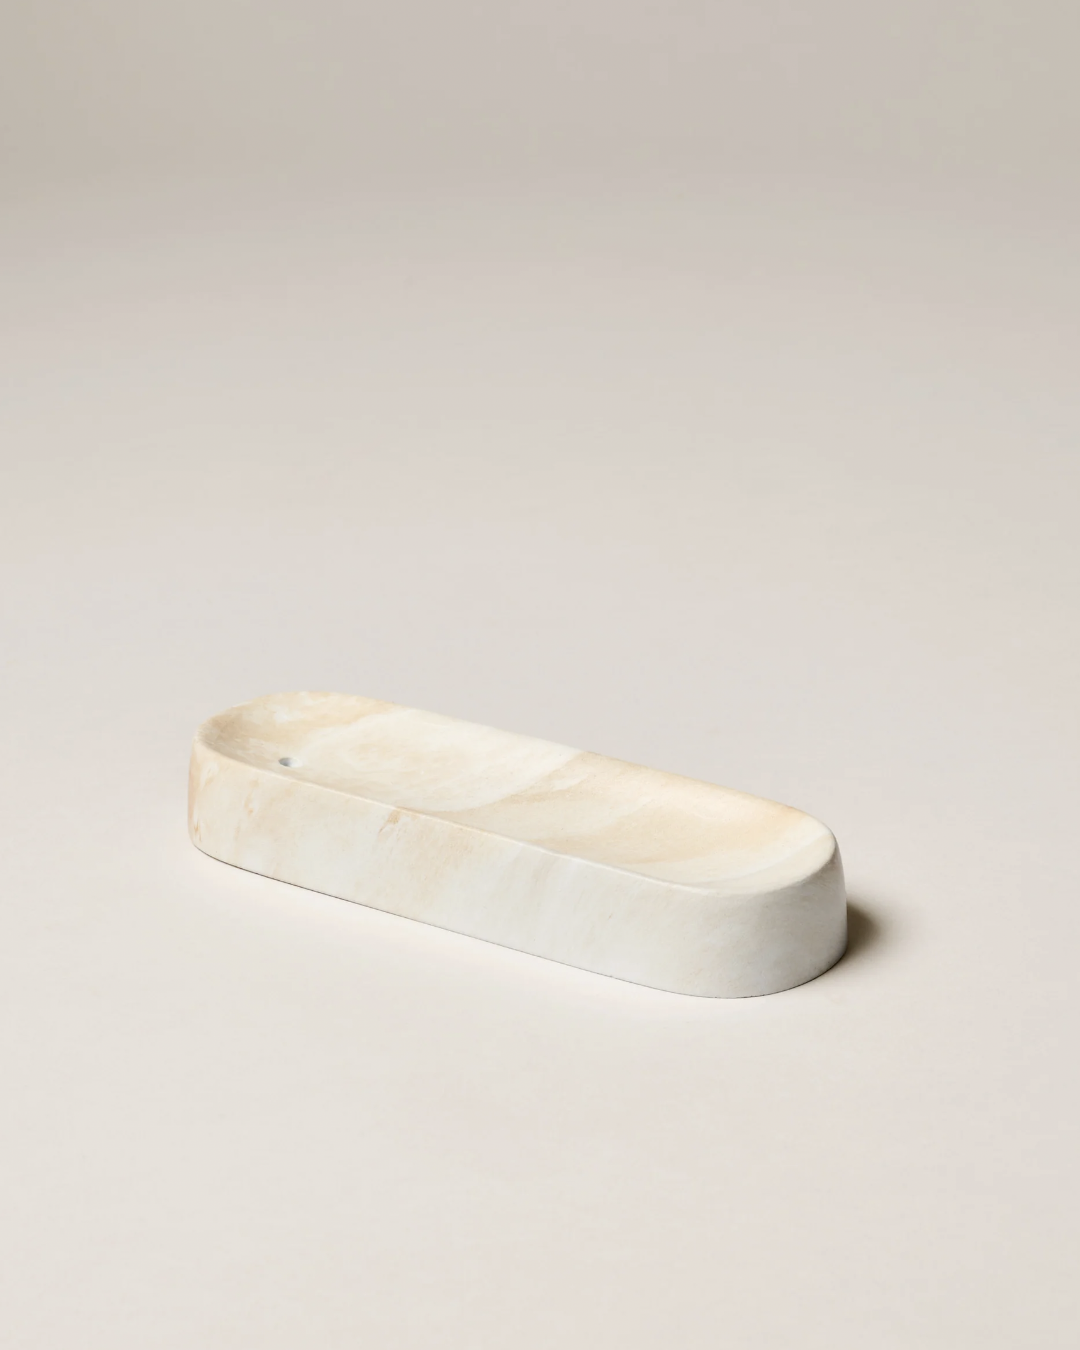 Ceramic Incense Holder - White Incense and Burners by Gentle Habits - Prae Wellness